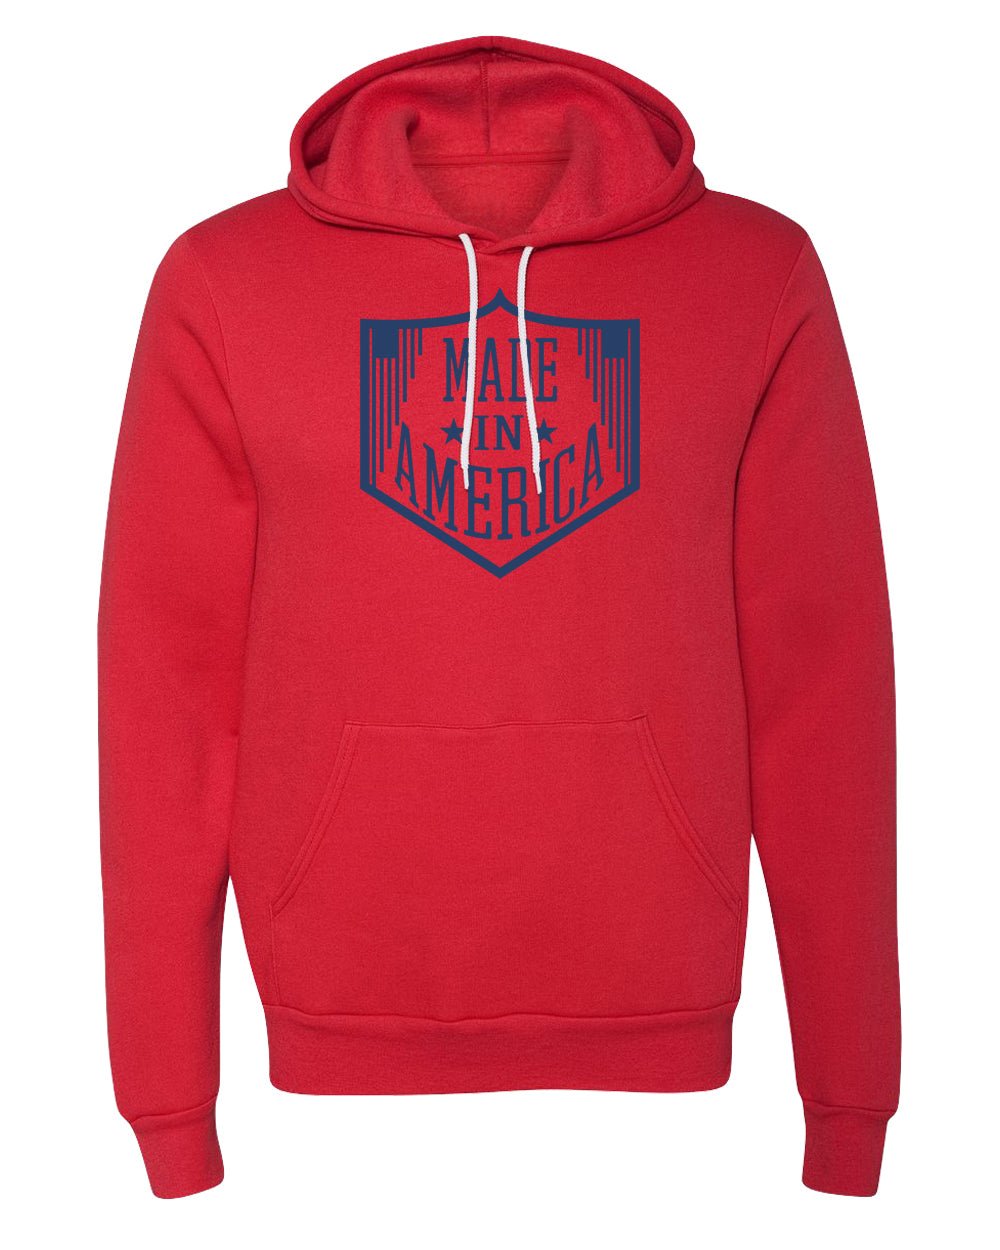 Made in America Unisex 4th of July Hoodies - Mato & Hash